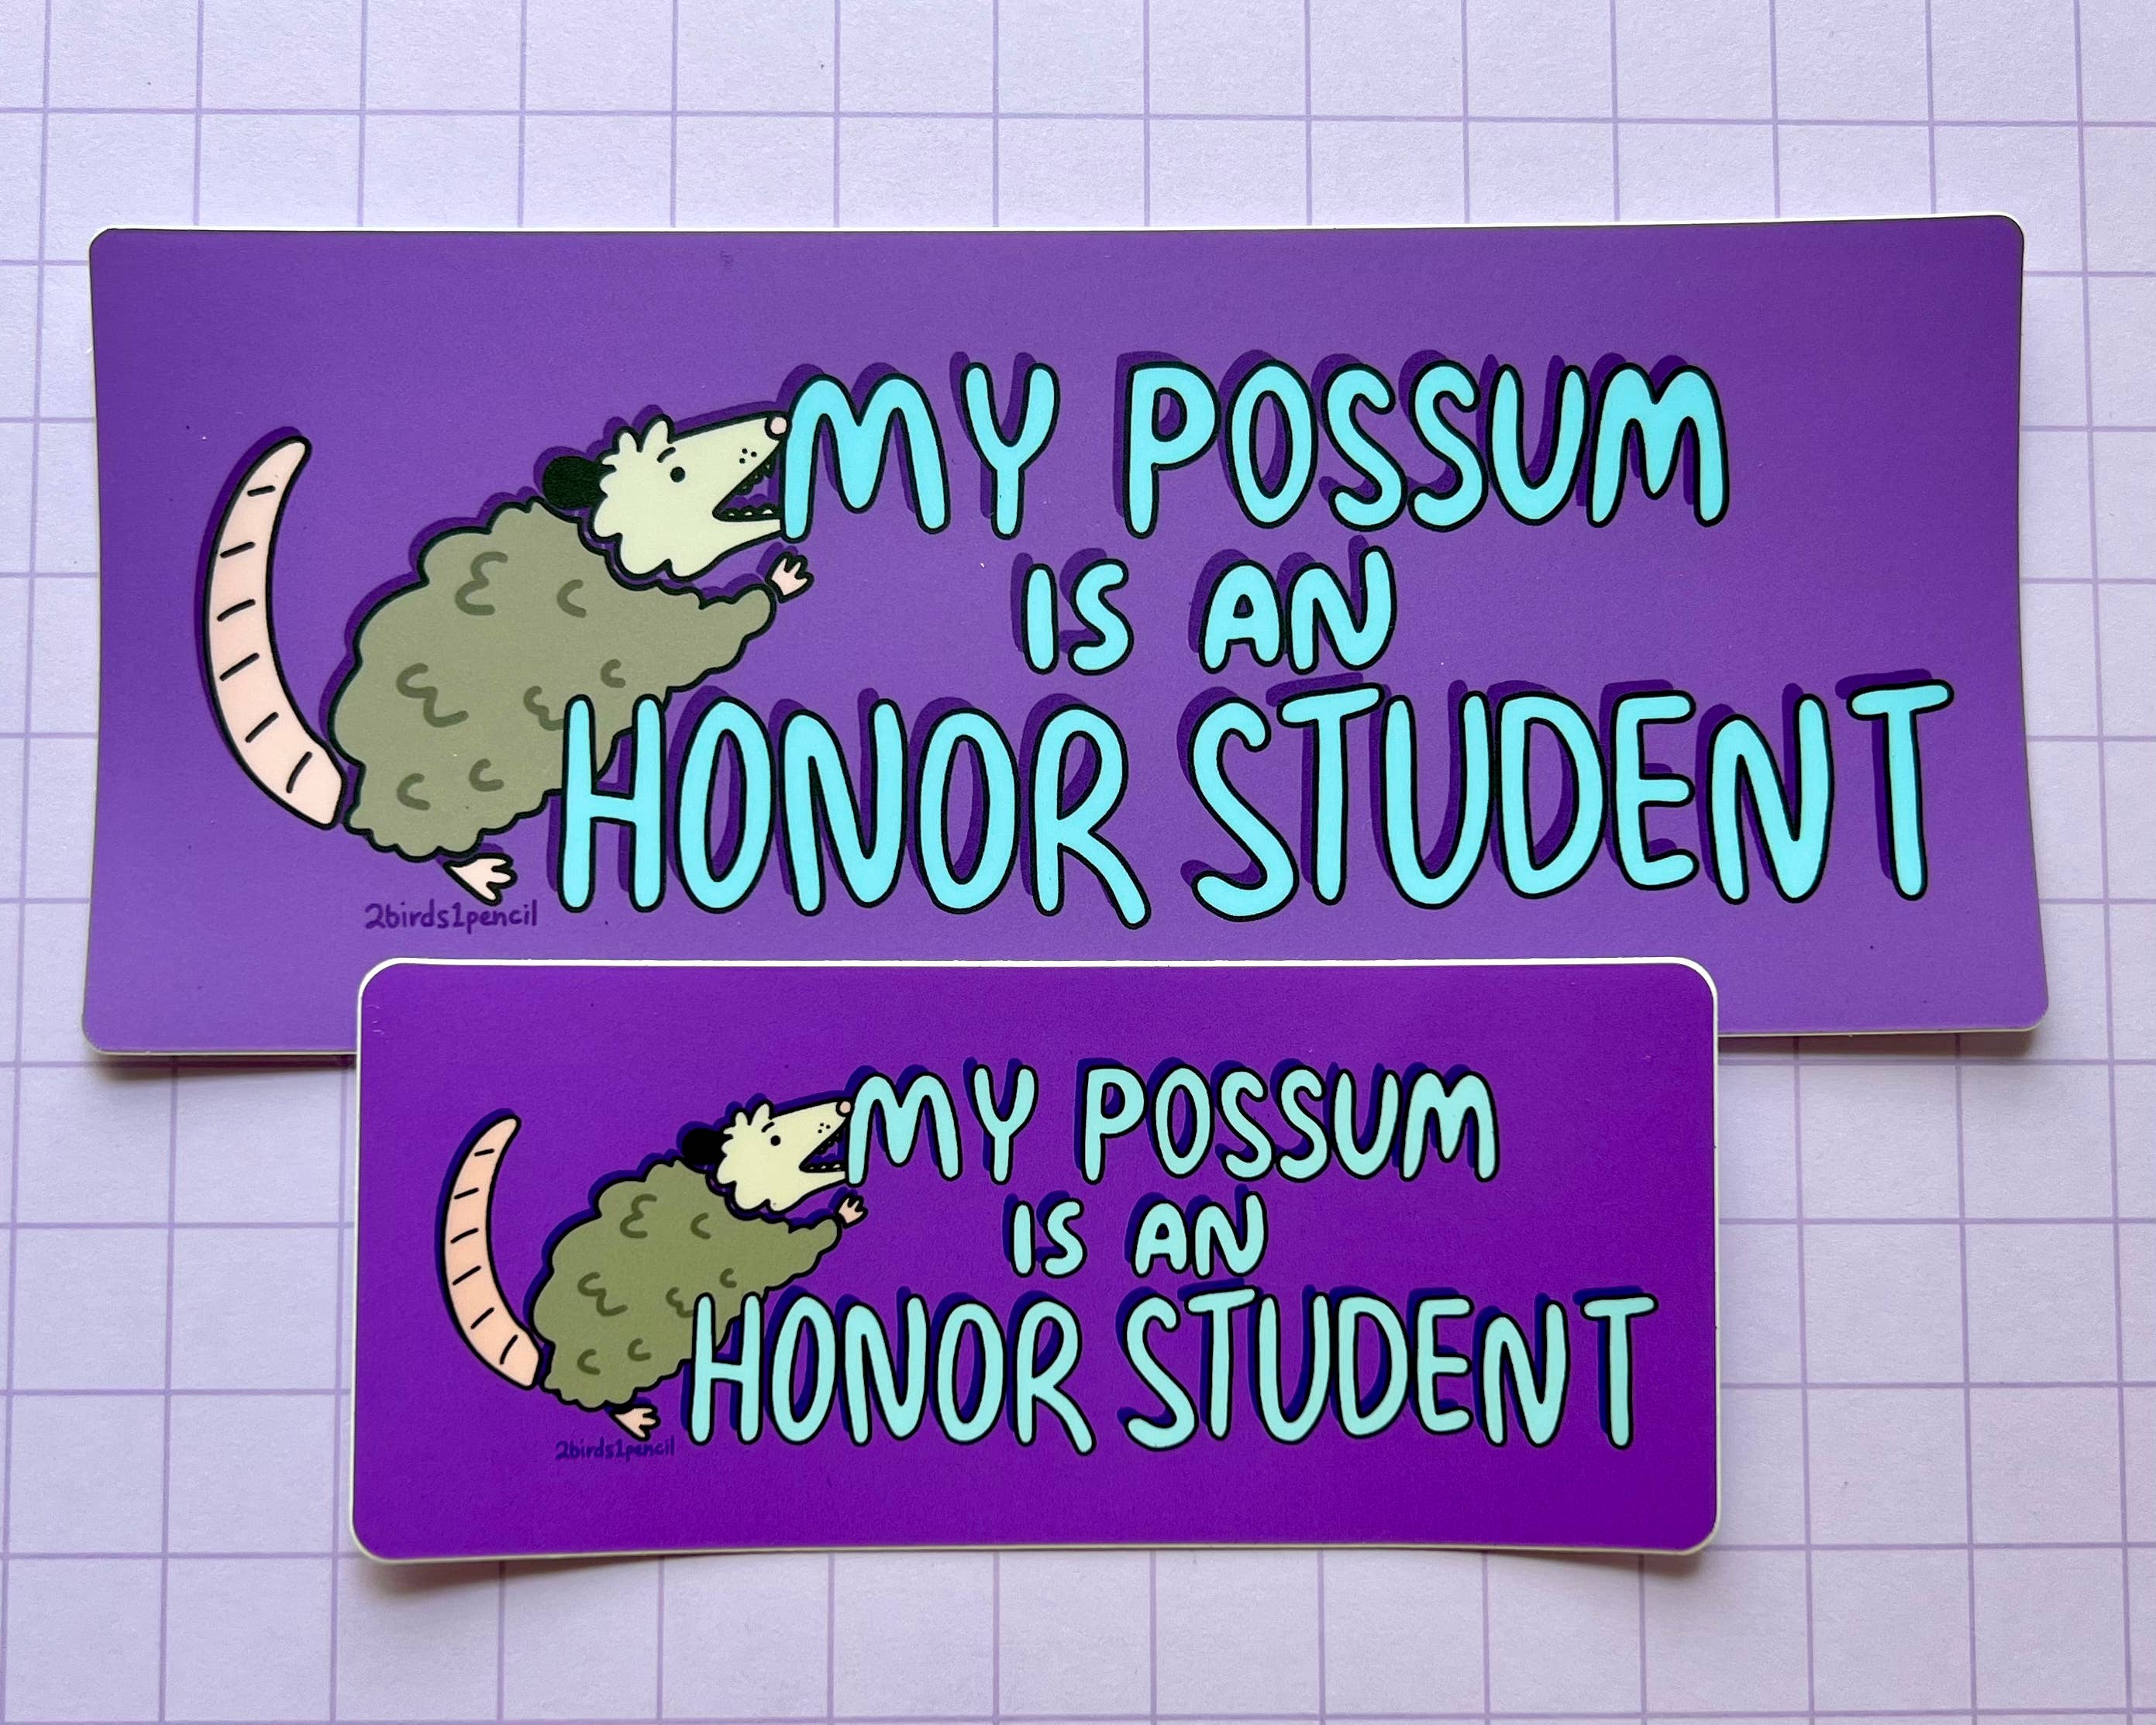 "My Possum is an Honor Student" Bumper Sticker: Large (7 x 3")